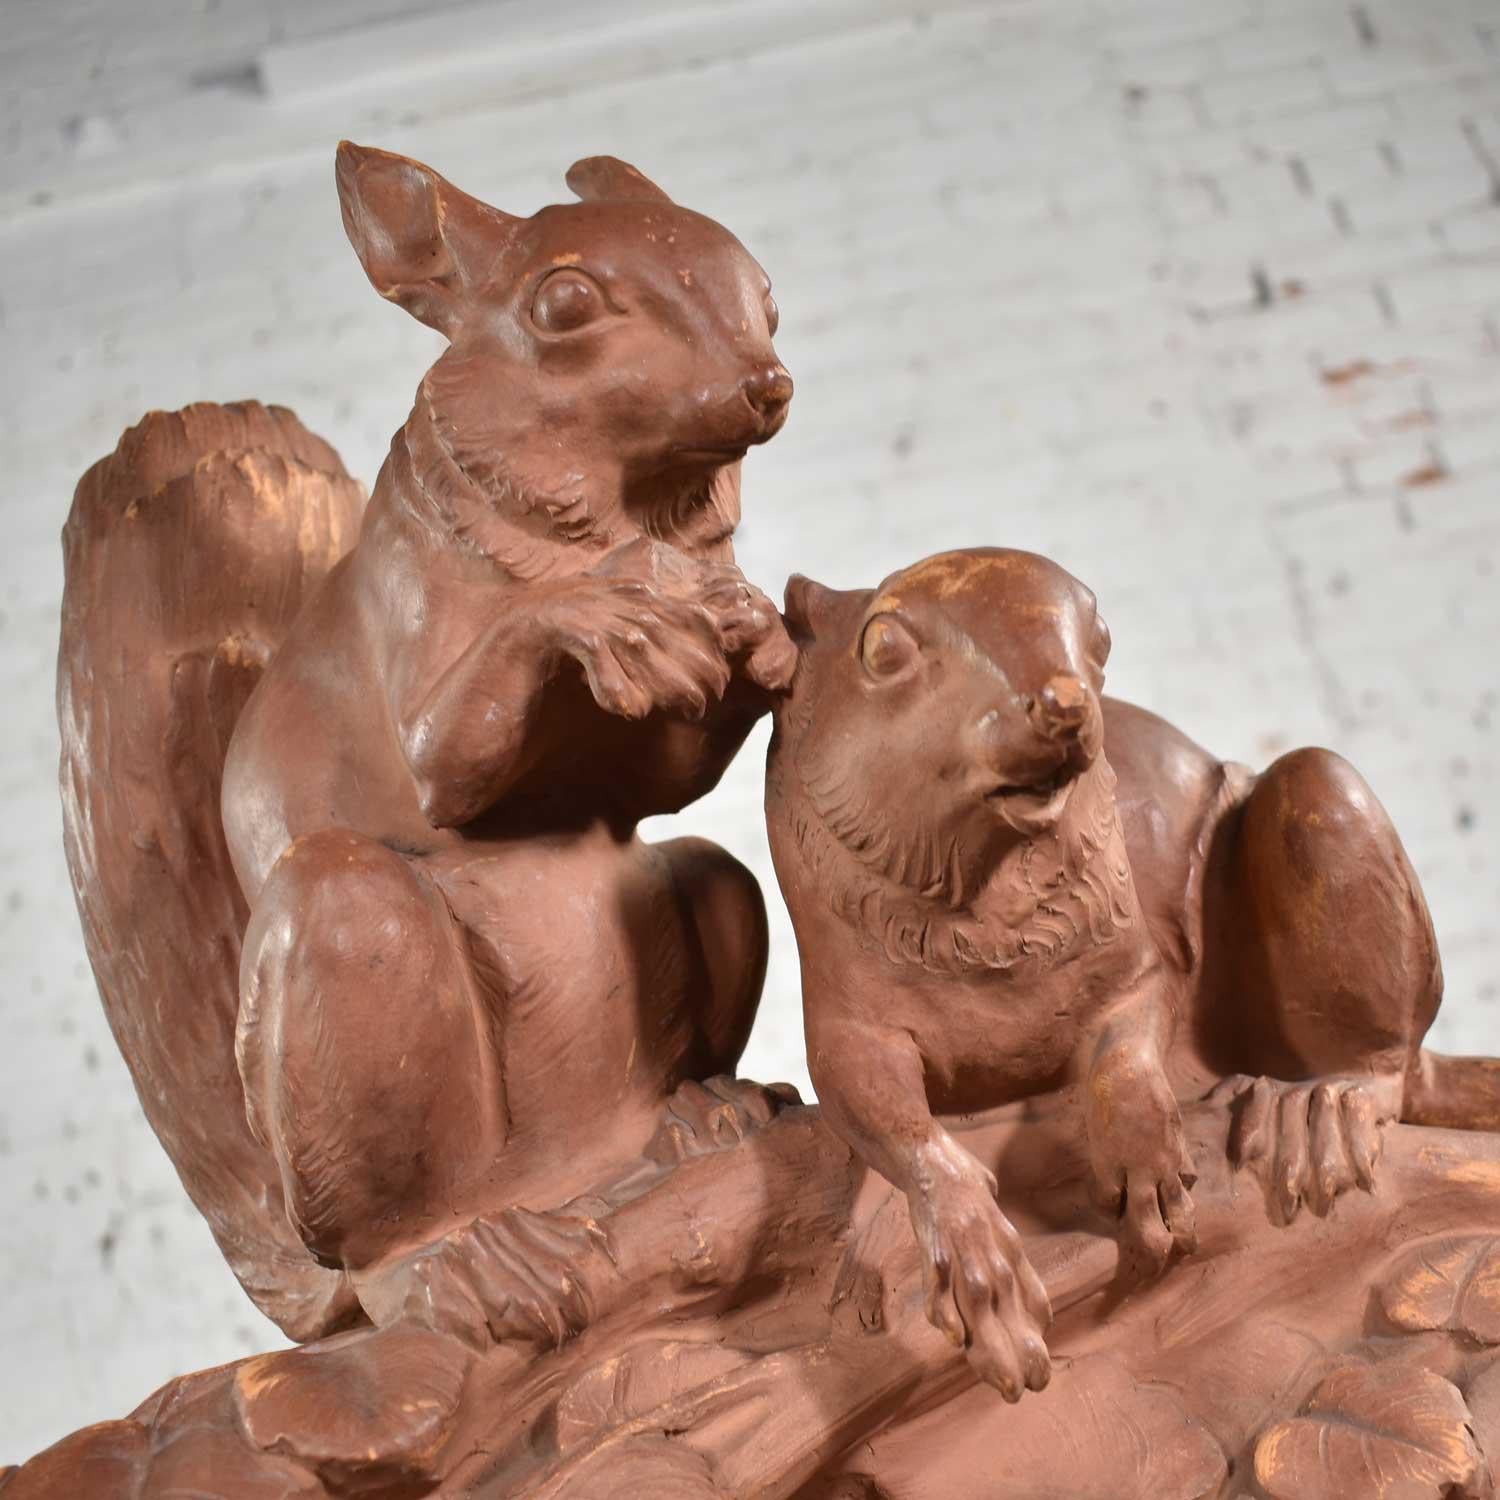 Terracotta Life-Size Squirrel Sculpture by Leo Amaury & Stamped R D’Arly France For Sale 3